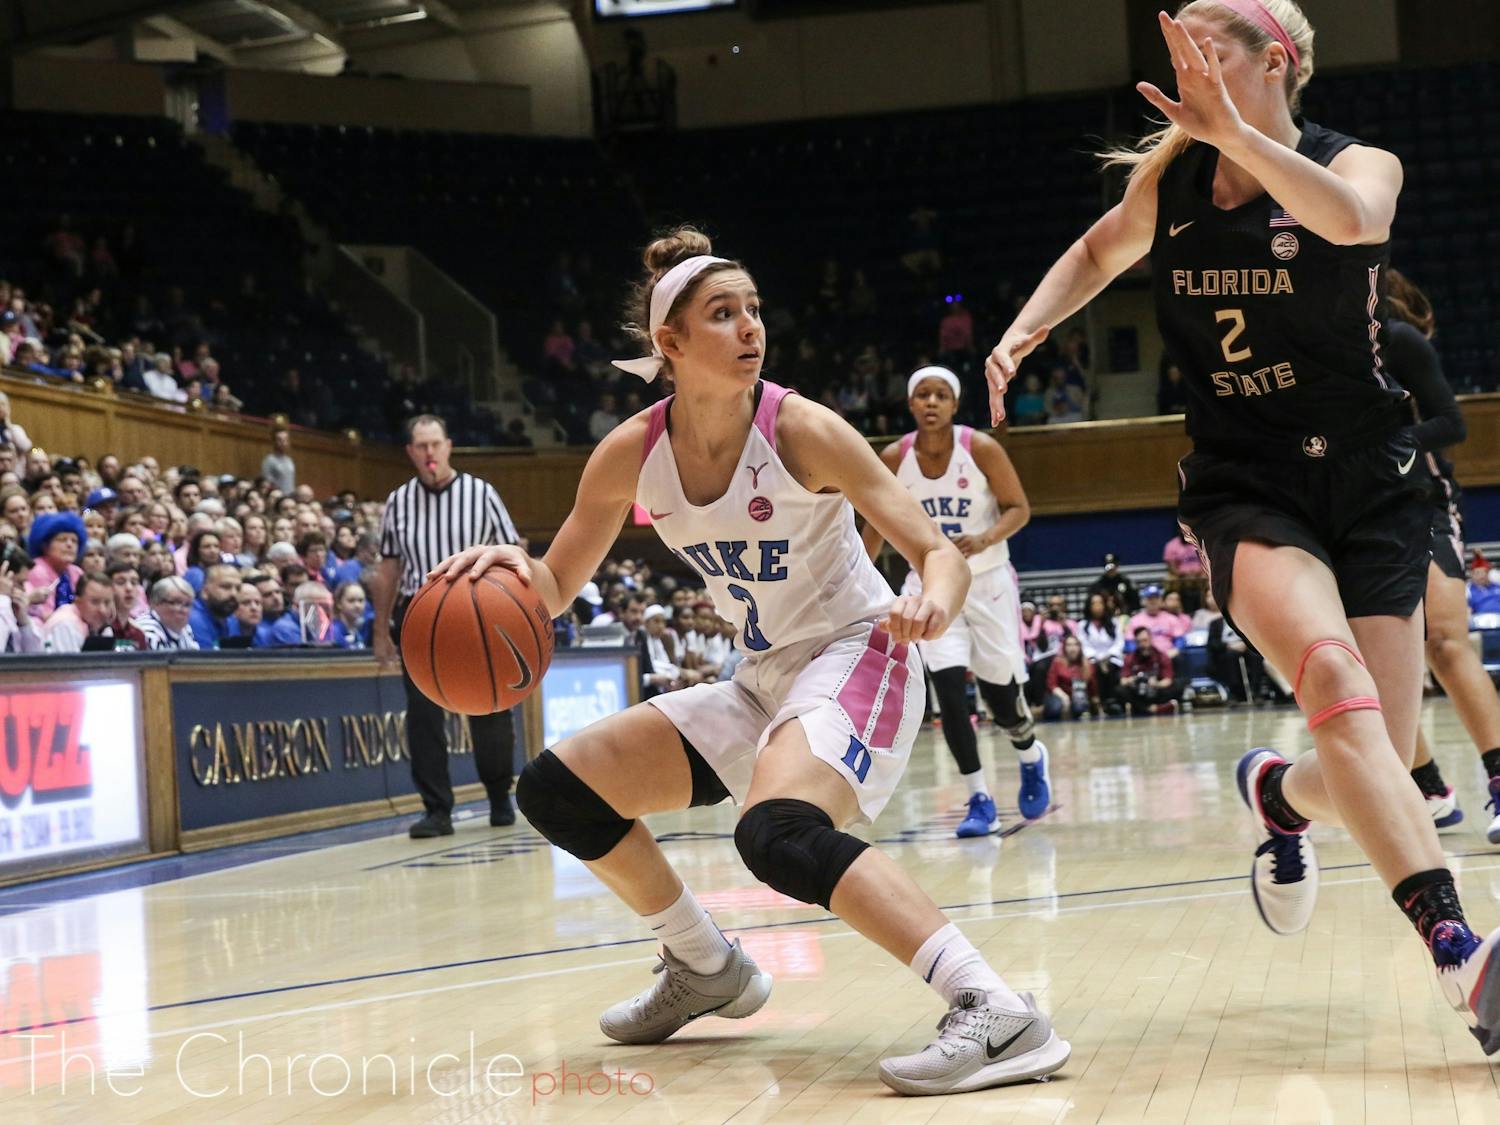 Duke Women's Basketball played strong and hard at today's home game against FSU. The Blue Devils won by a close margin, with a final score of 66-64.